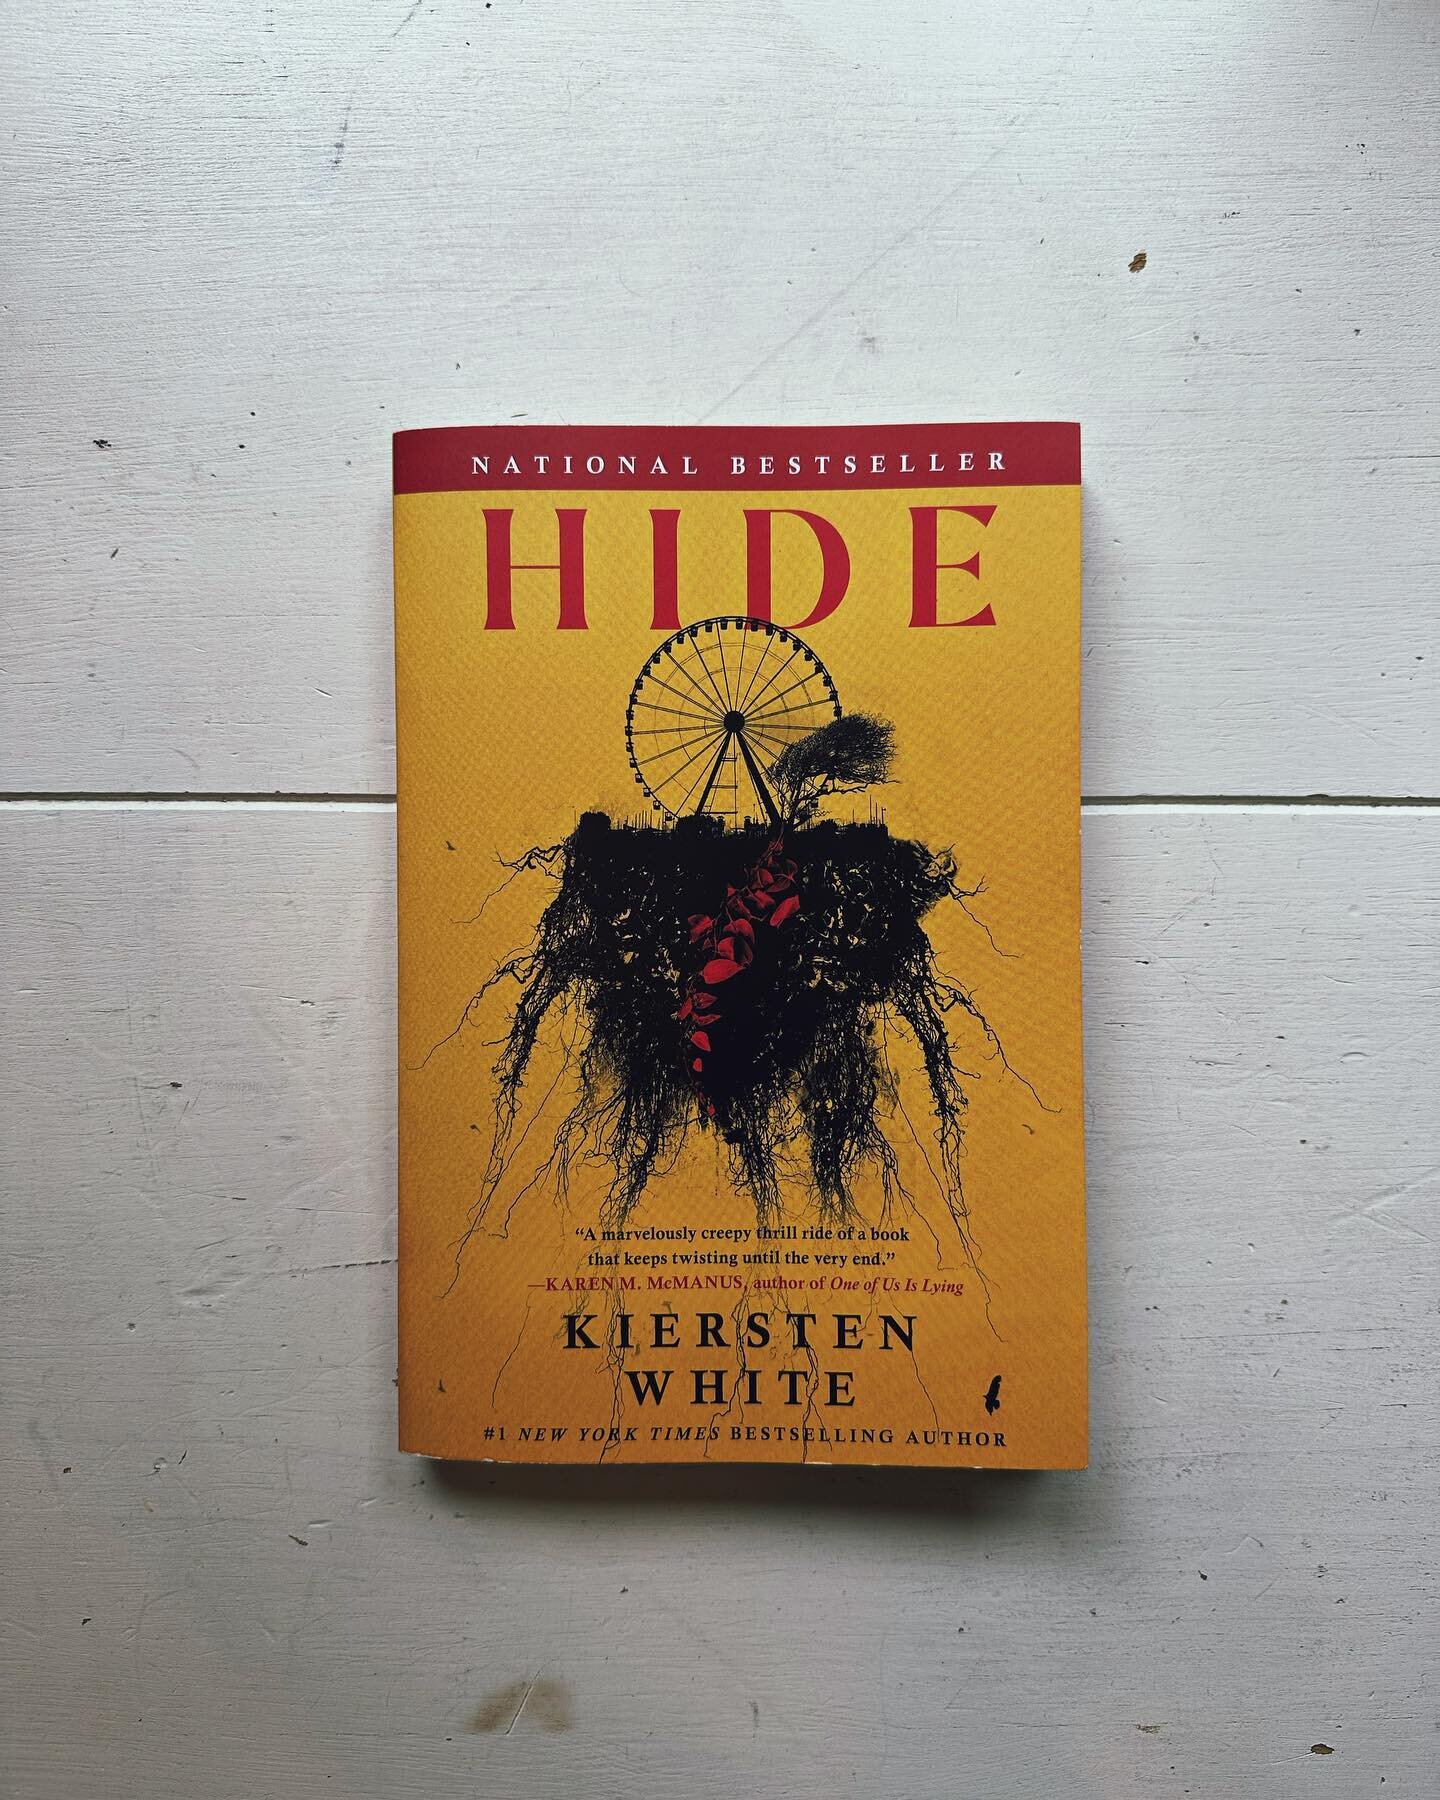 New book club podcast is up. Find us on Spotify, Apple Podcasts, YouTube, and iHeart. 

#hide #kierstenwhite #horror #horrorbooks #darkbooks #bookclub #tbr #podcast #bookpodcast #talkingbooks #bookrecommendations #hideandseek